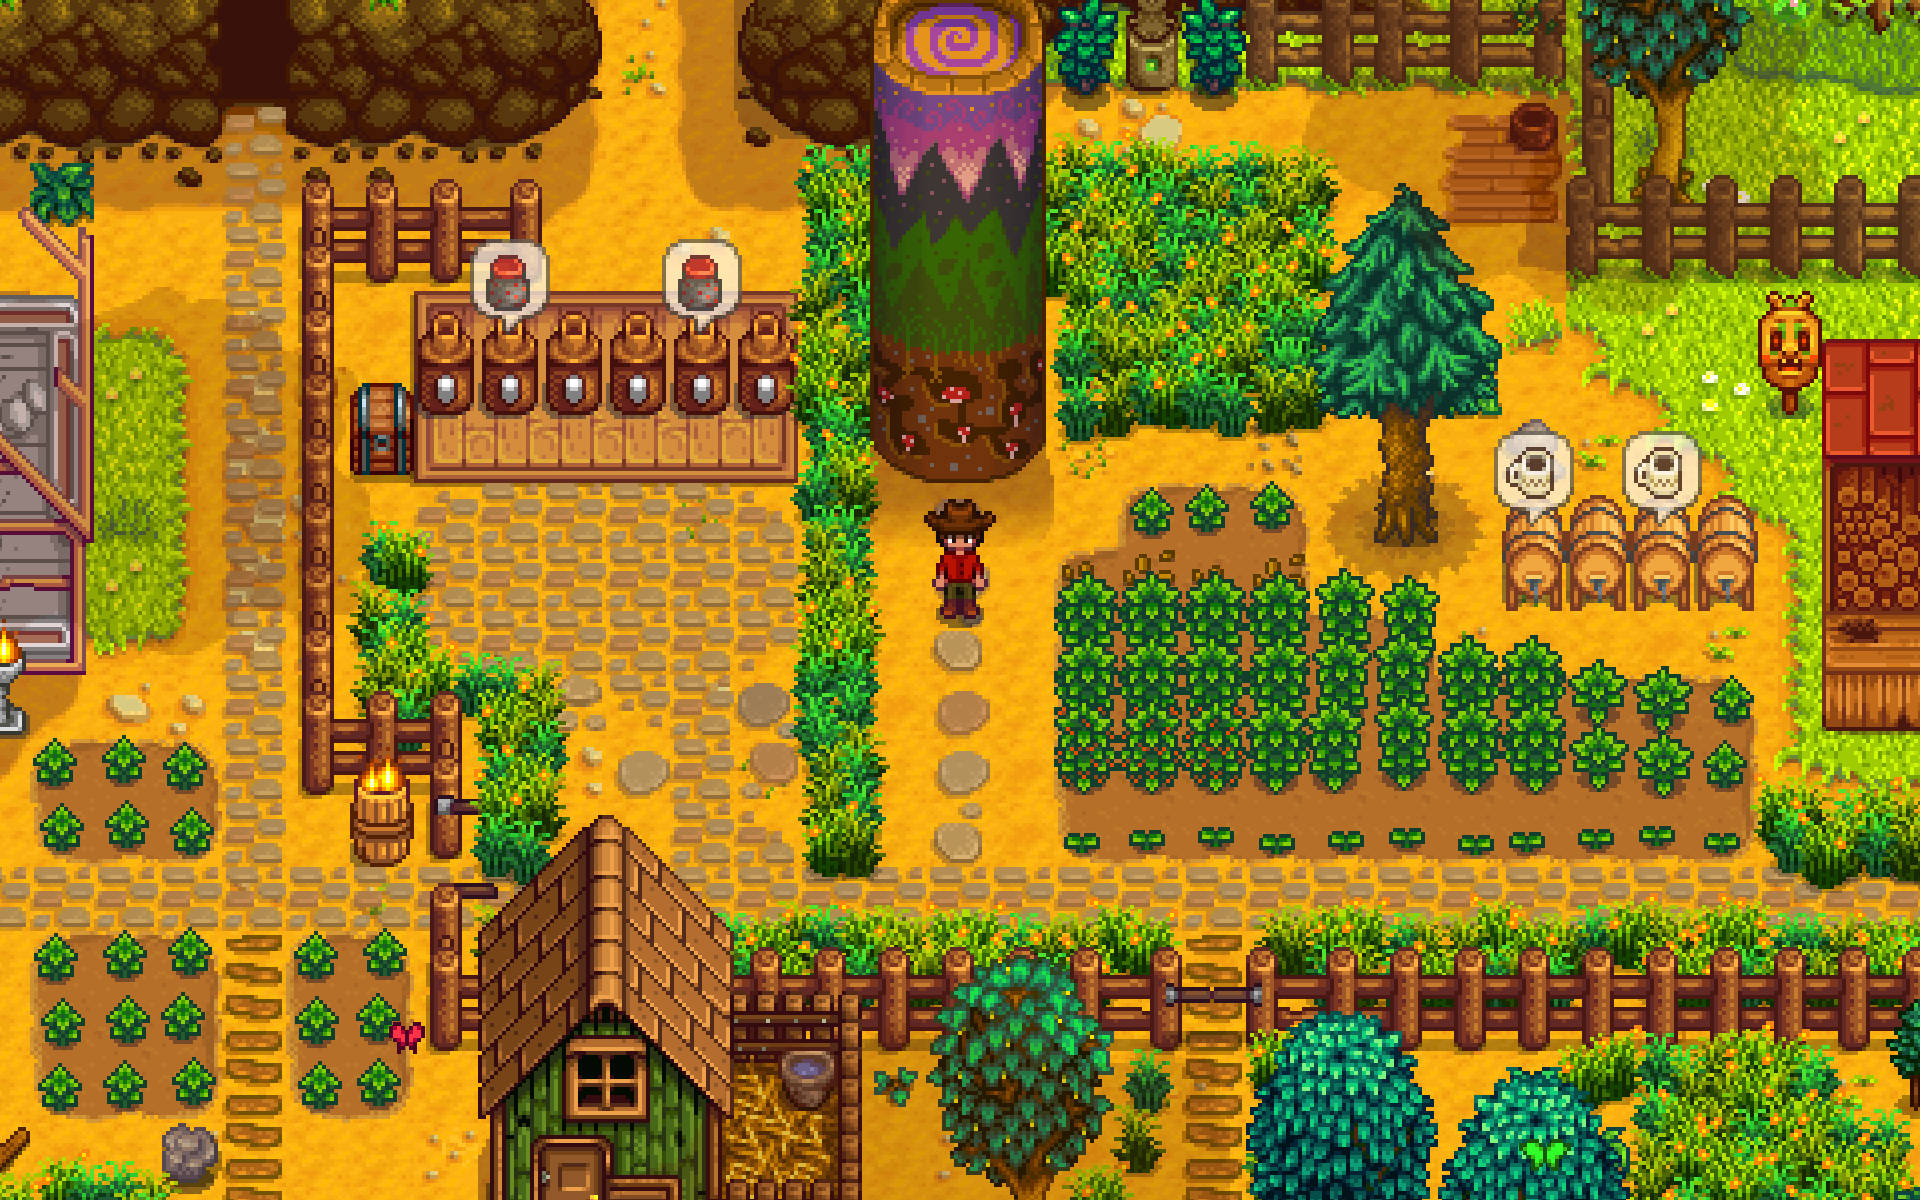 Enjoy the peaceful life of Stardew Valley Wallpaper